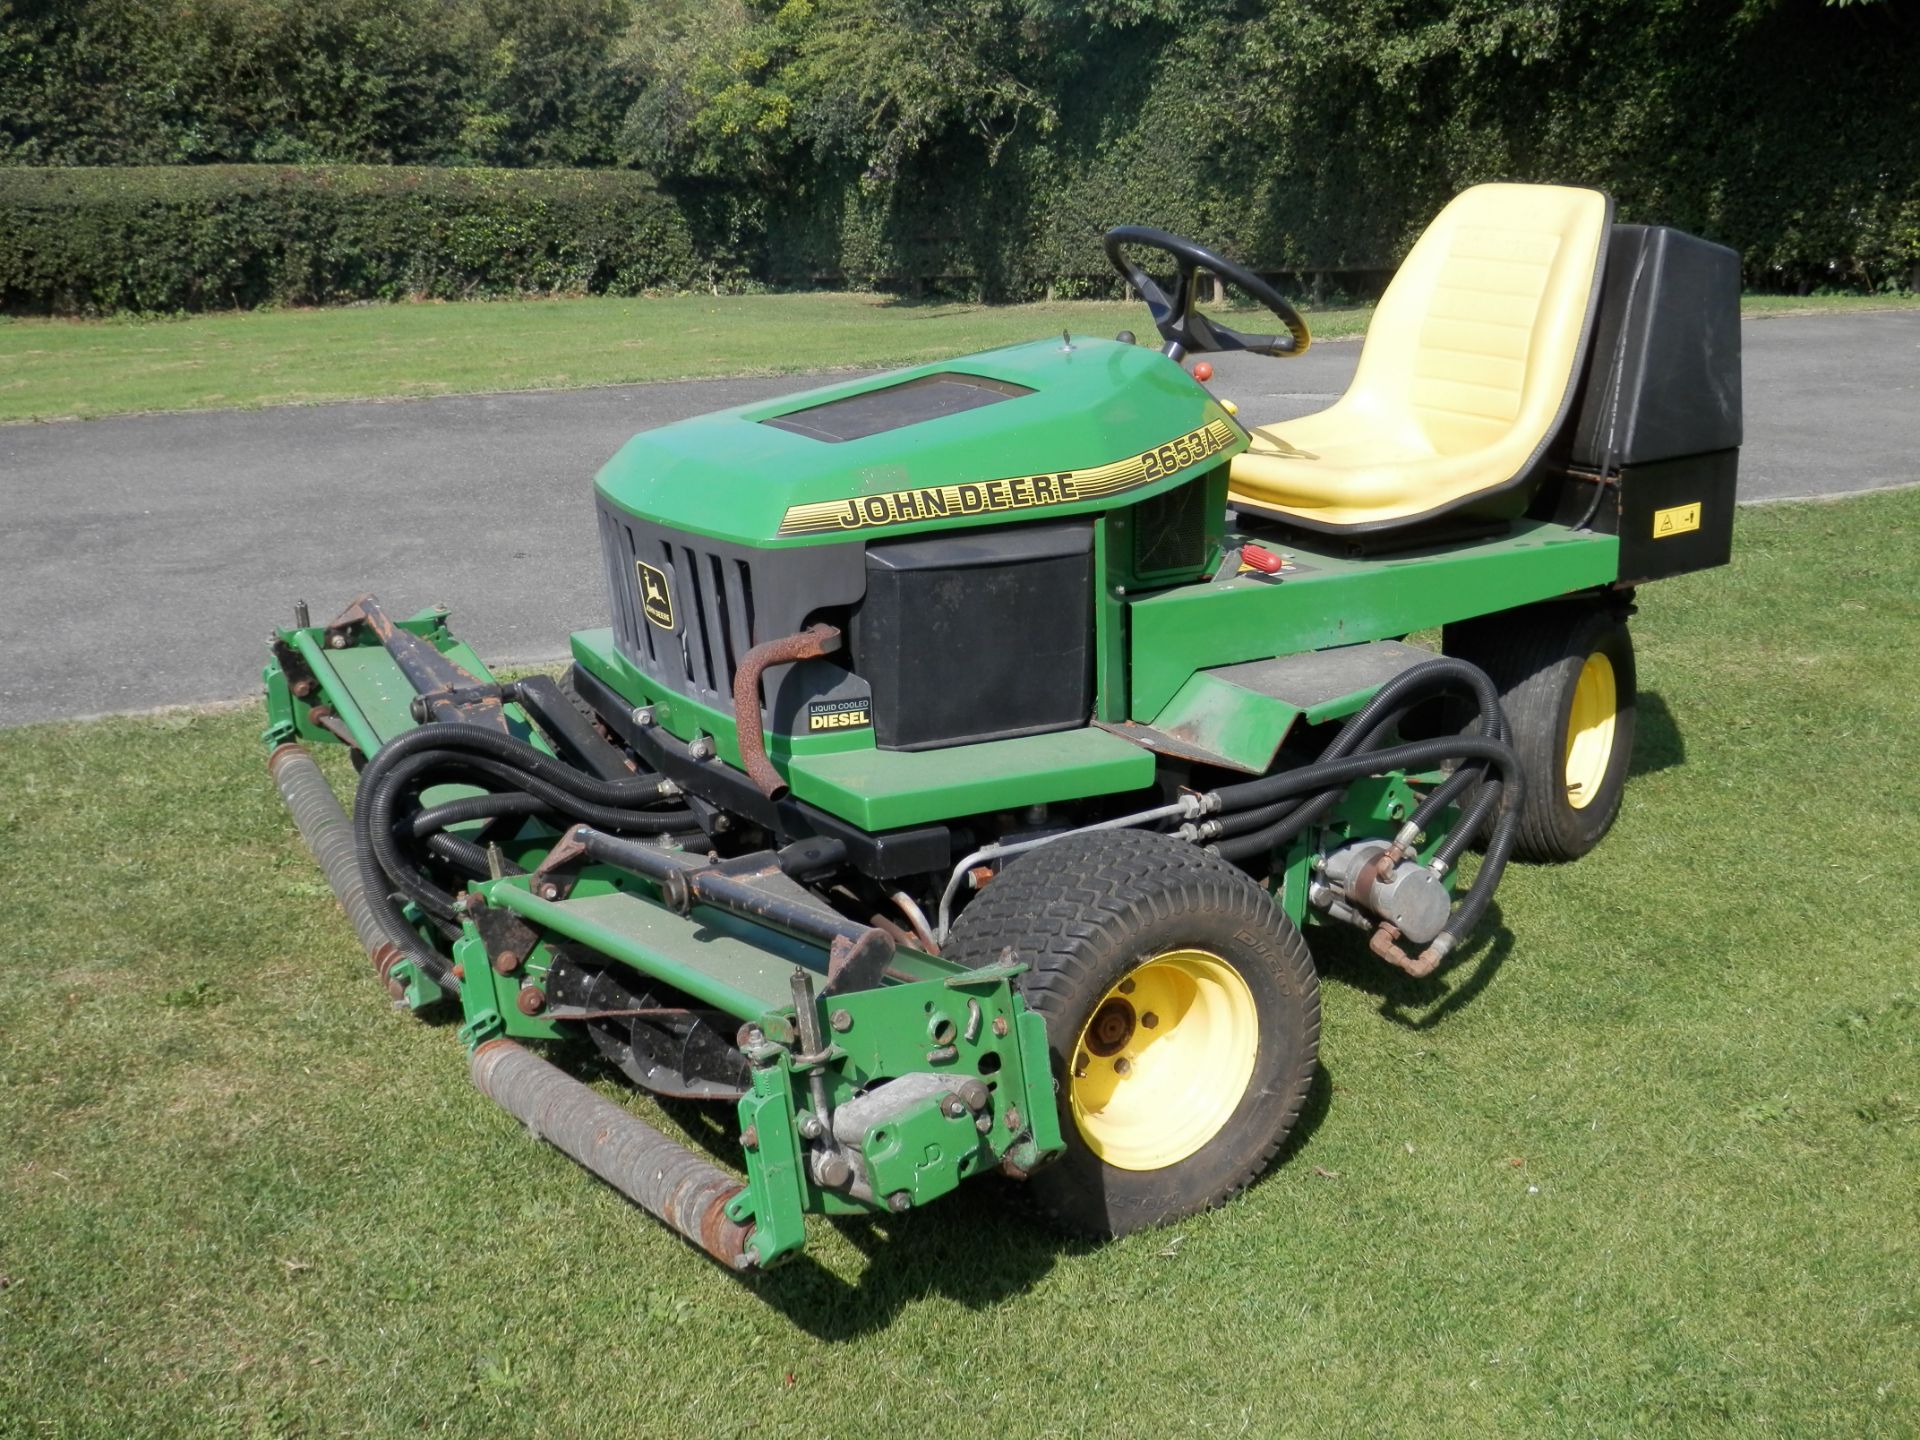 1996 JOHN DEERE 2653A RIDE ON GANG MOWER,CHECKED & WORKING. WIDE CUT, IDEAL FOR ESTATES/GOLF COURSES